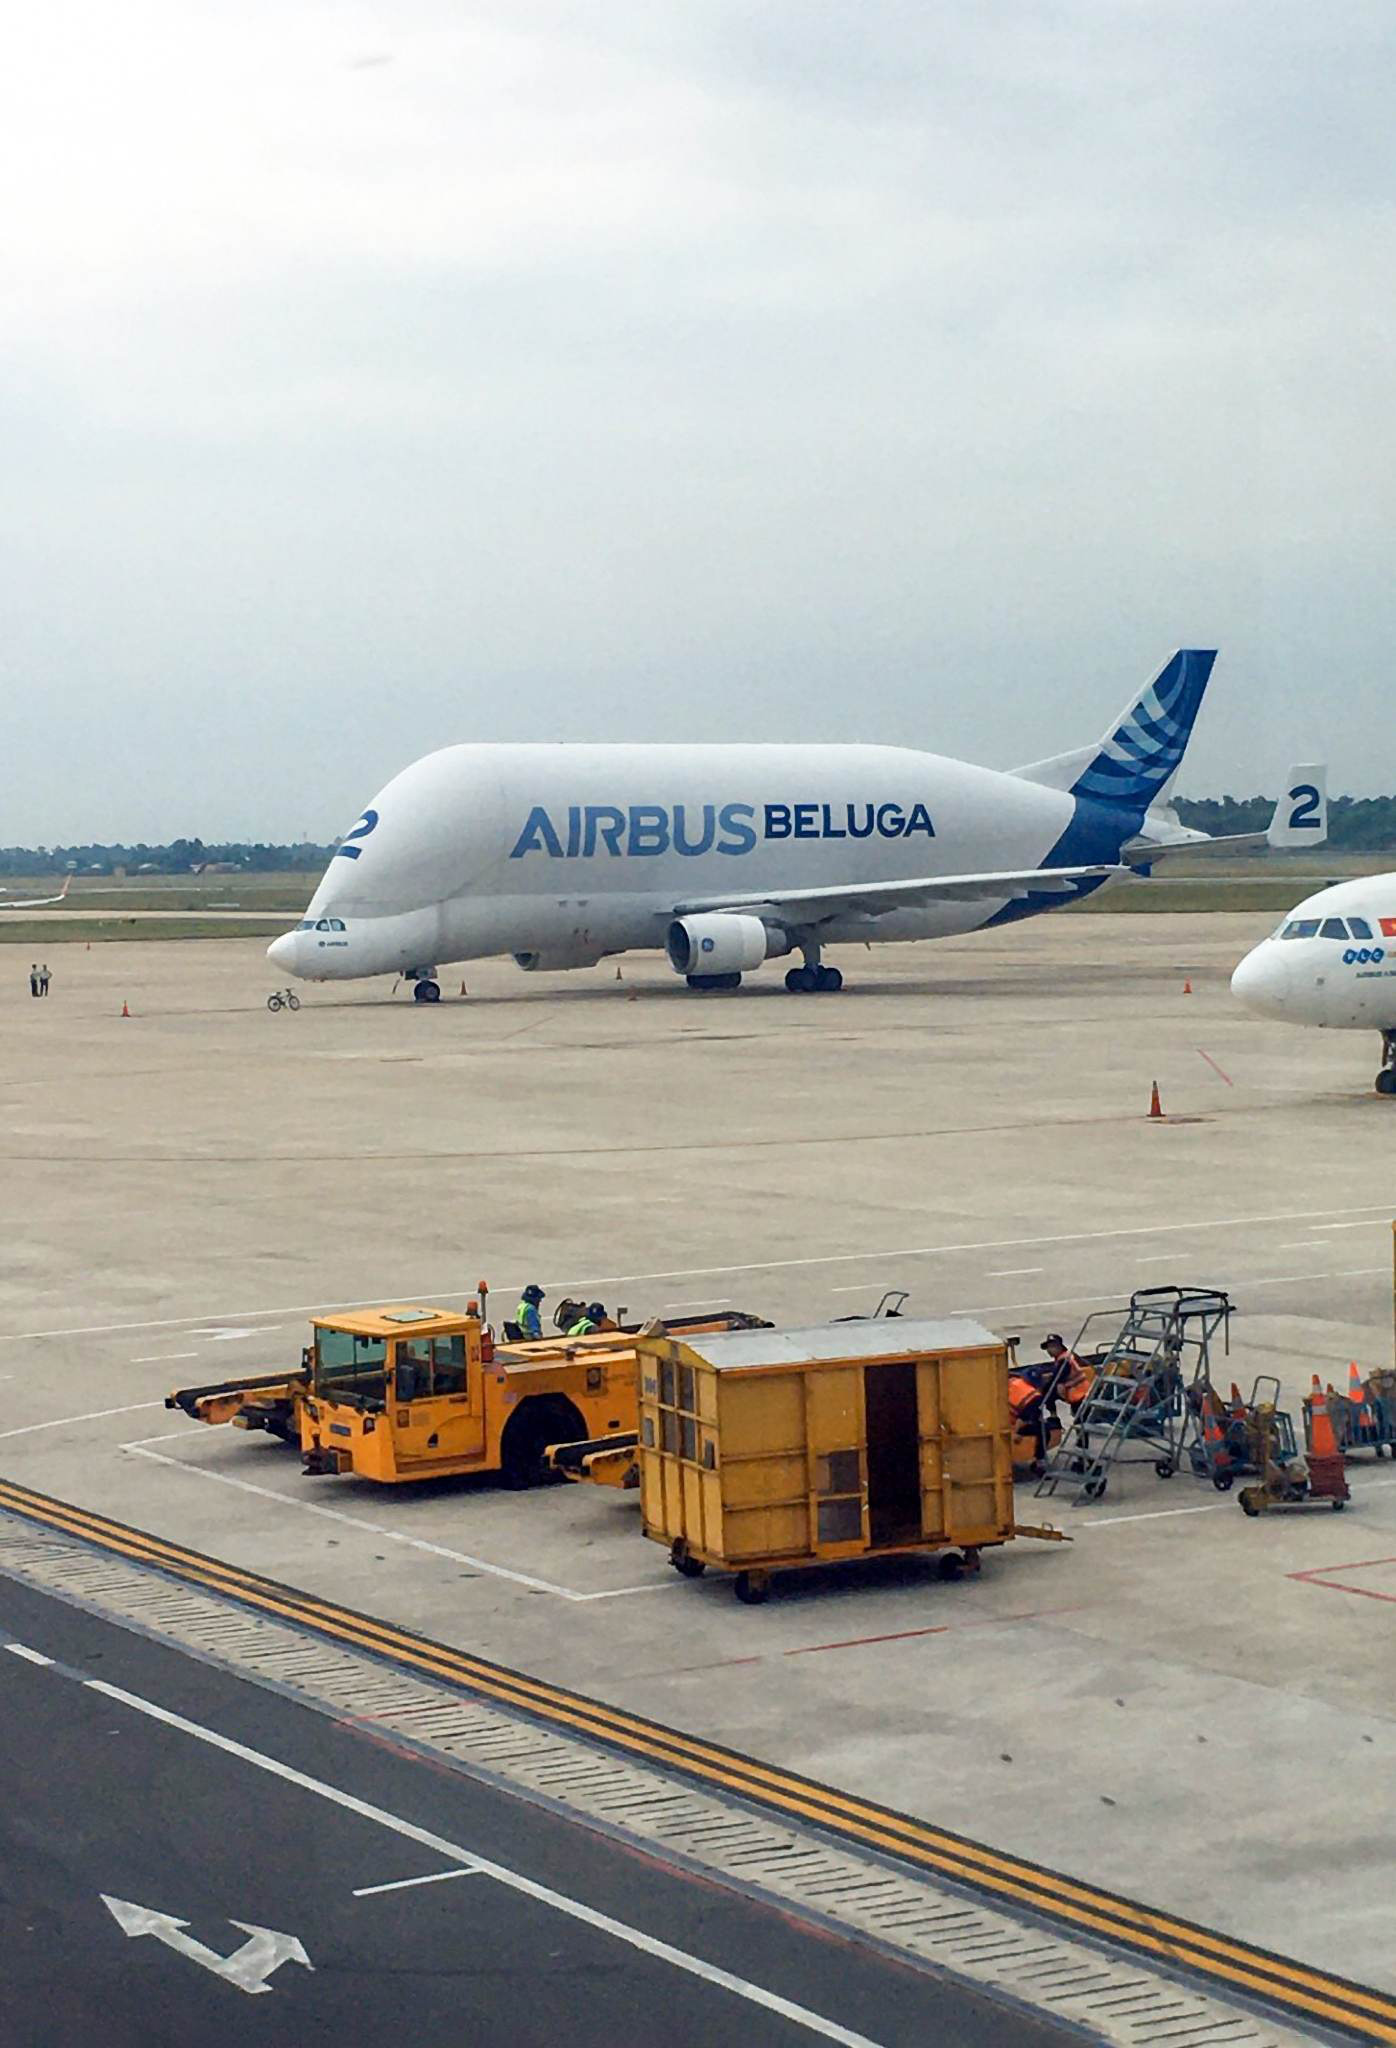 The Airbus-operated Belugas, serve Airbus production and assembly activities and offer outsized cargo transport services. Photo: N.N.D / Tuoi Tre